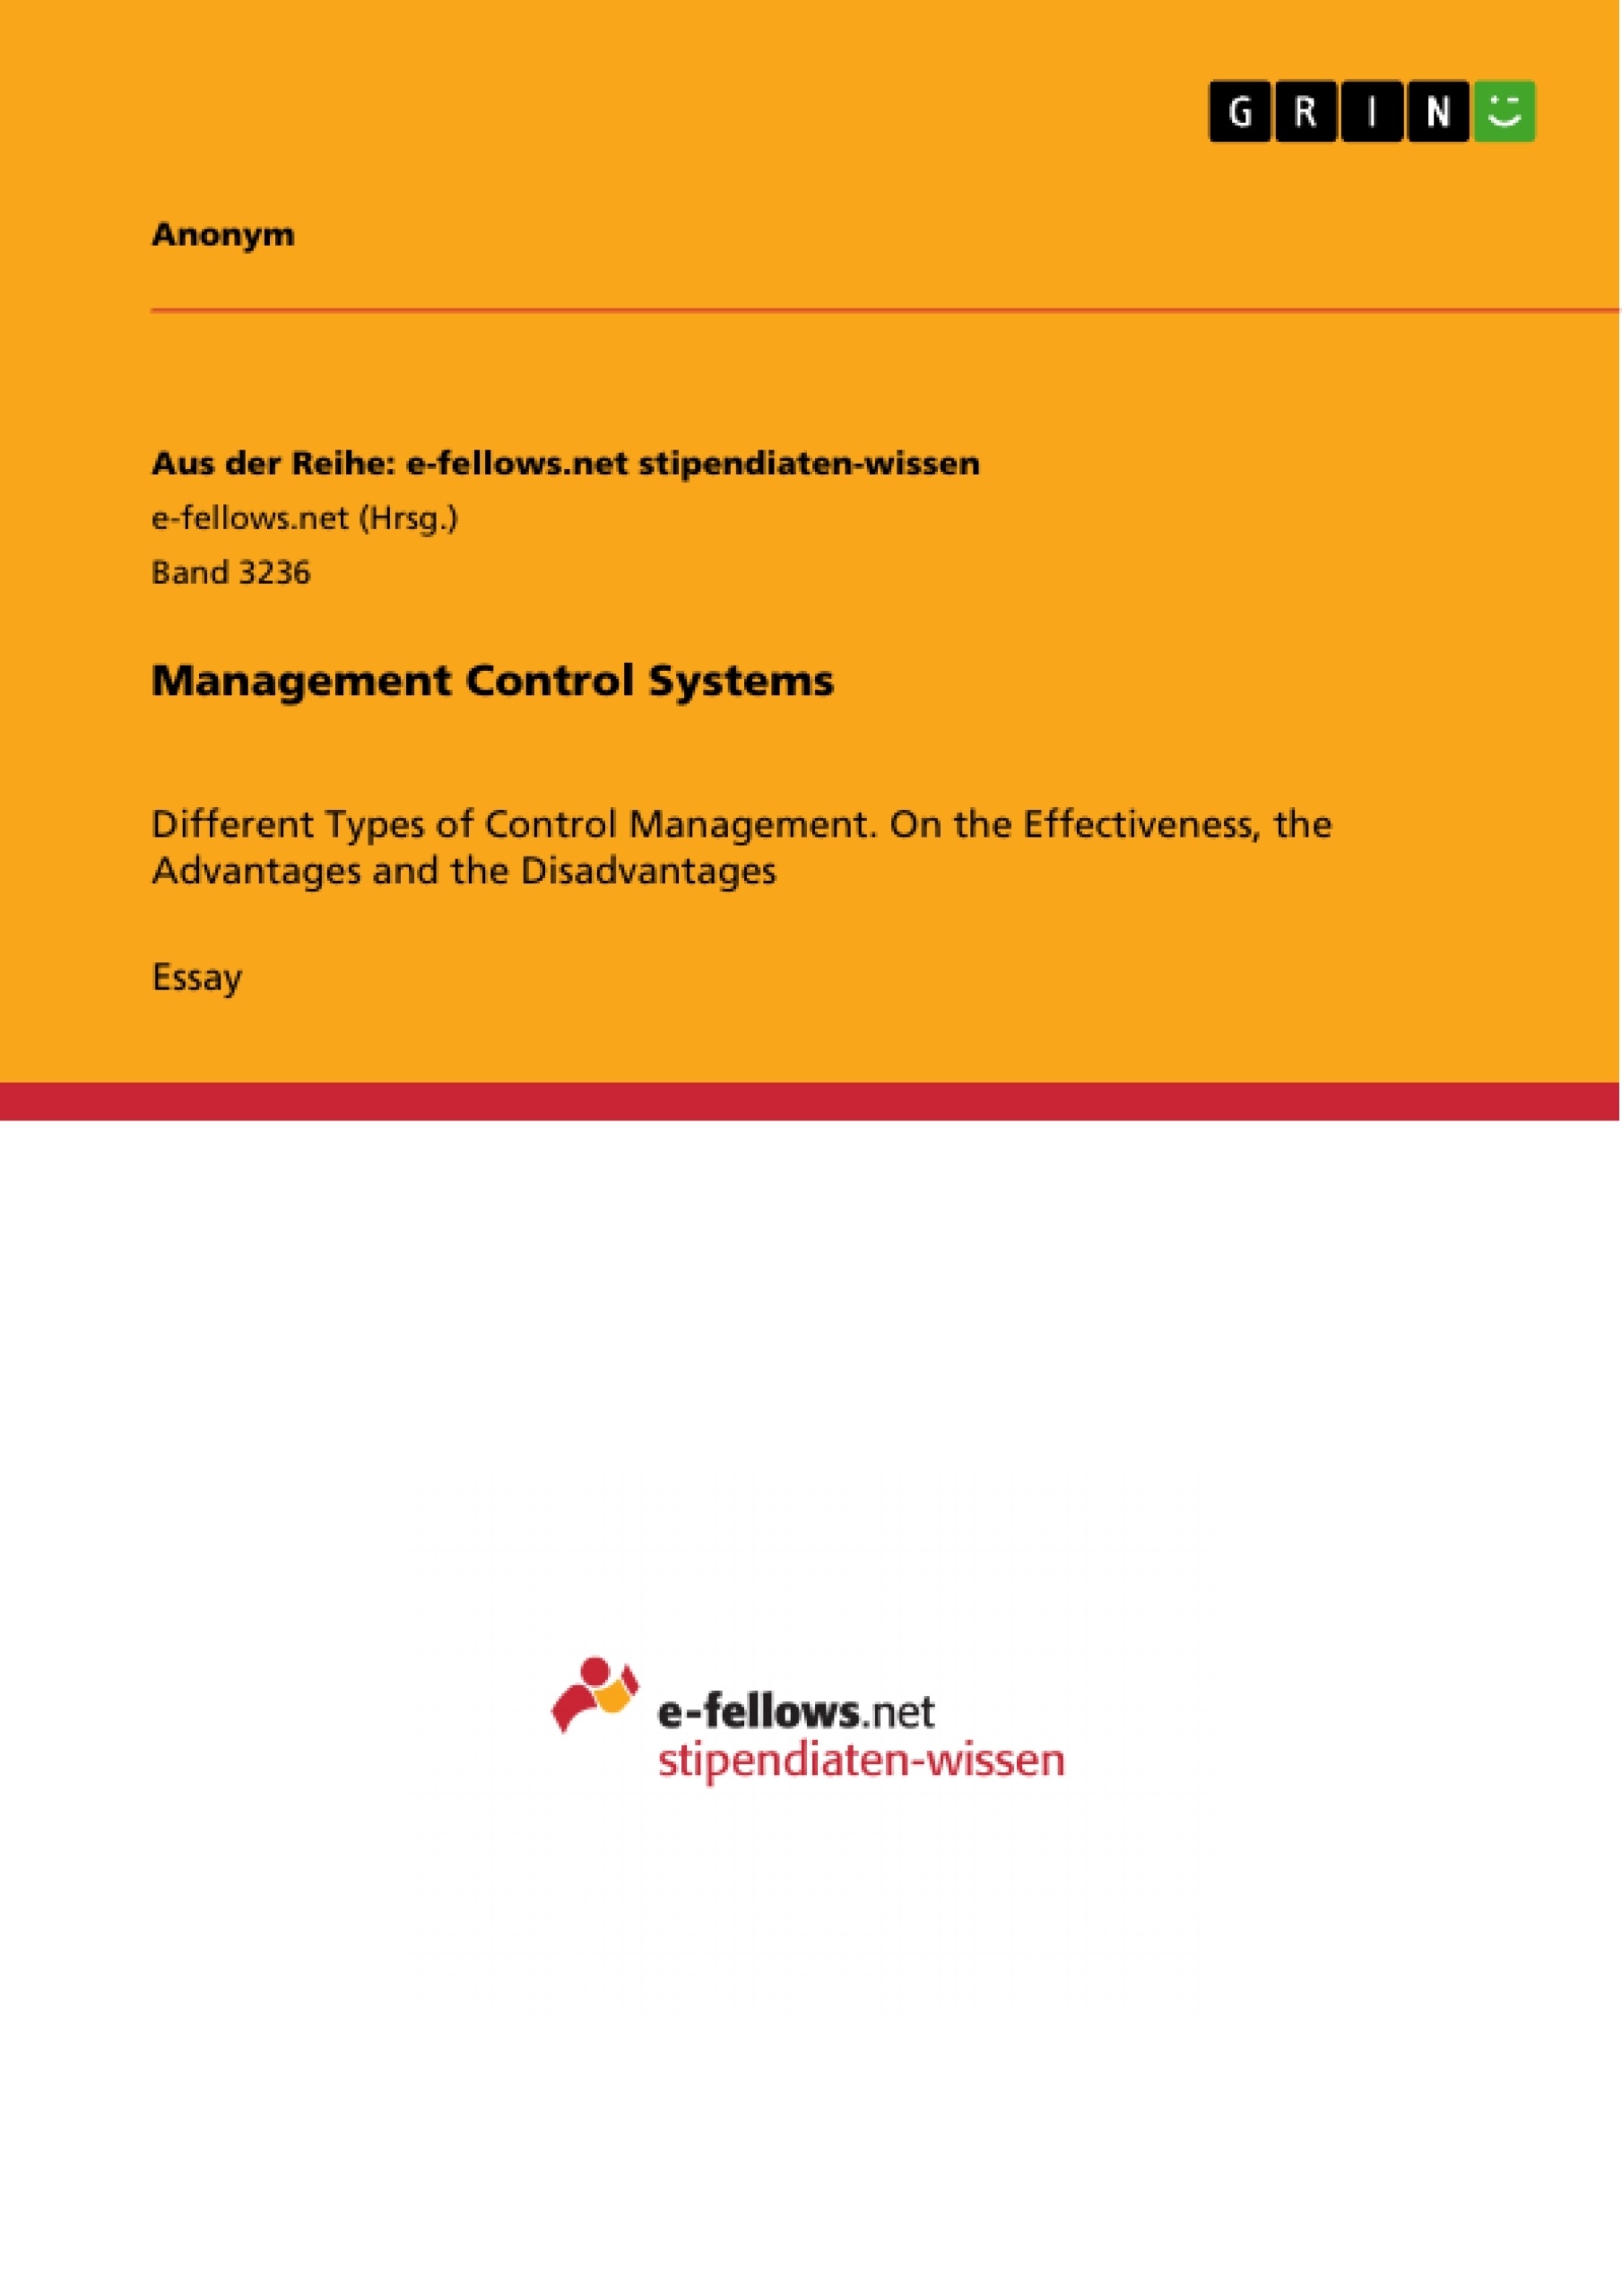 Title: Management Control Systems